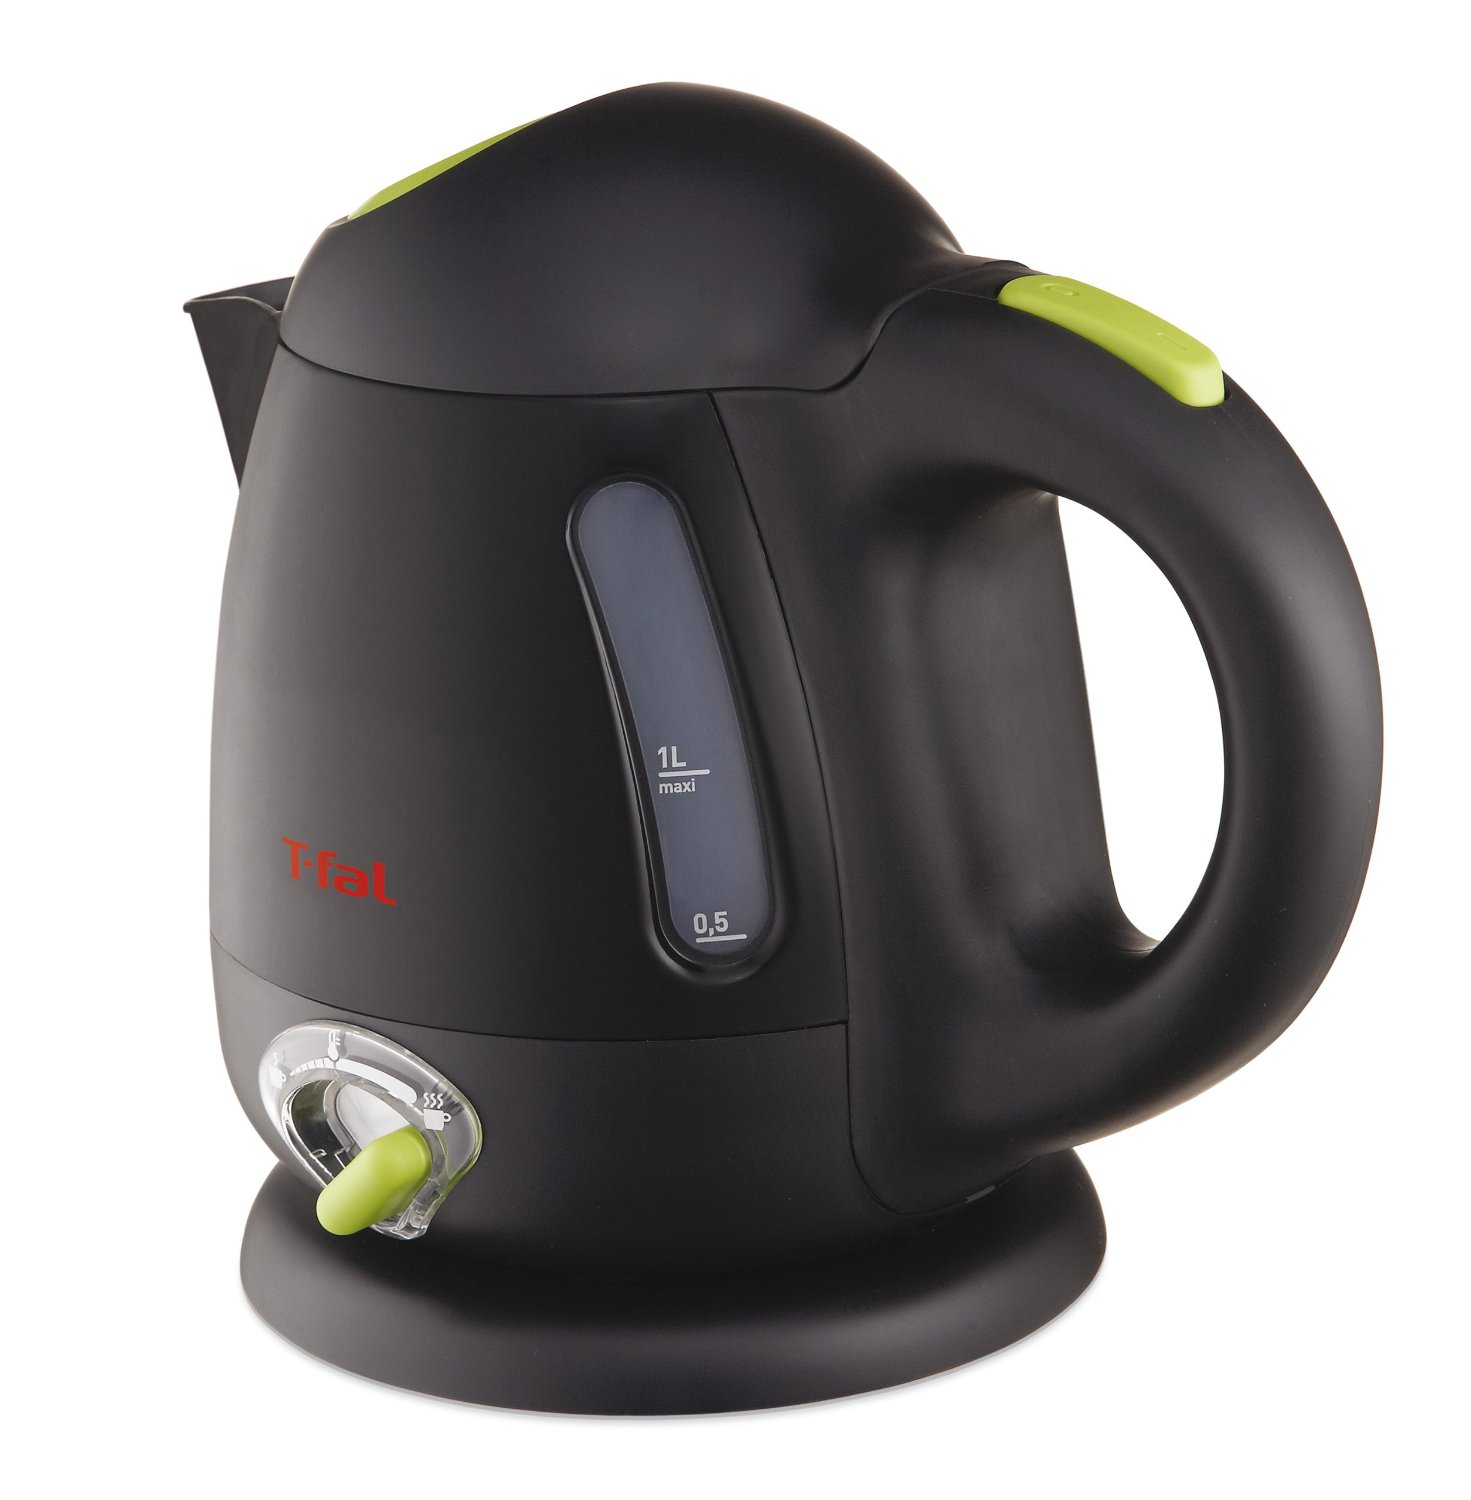 T-fal Balanced Living 4-cup electric kettle for $19